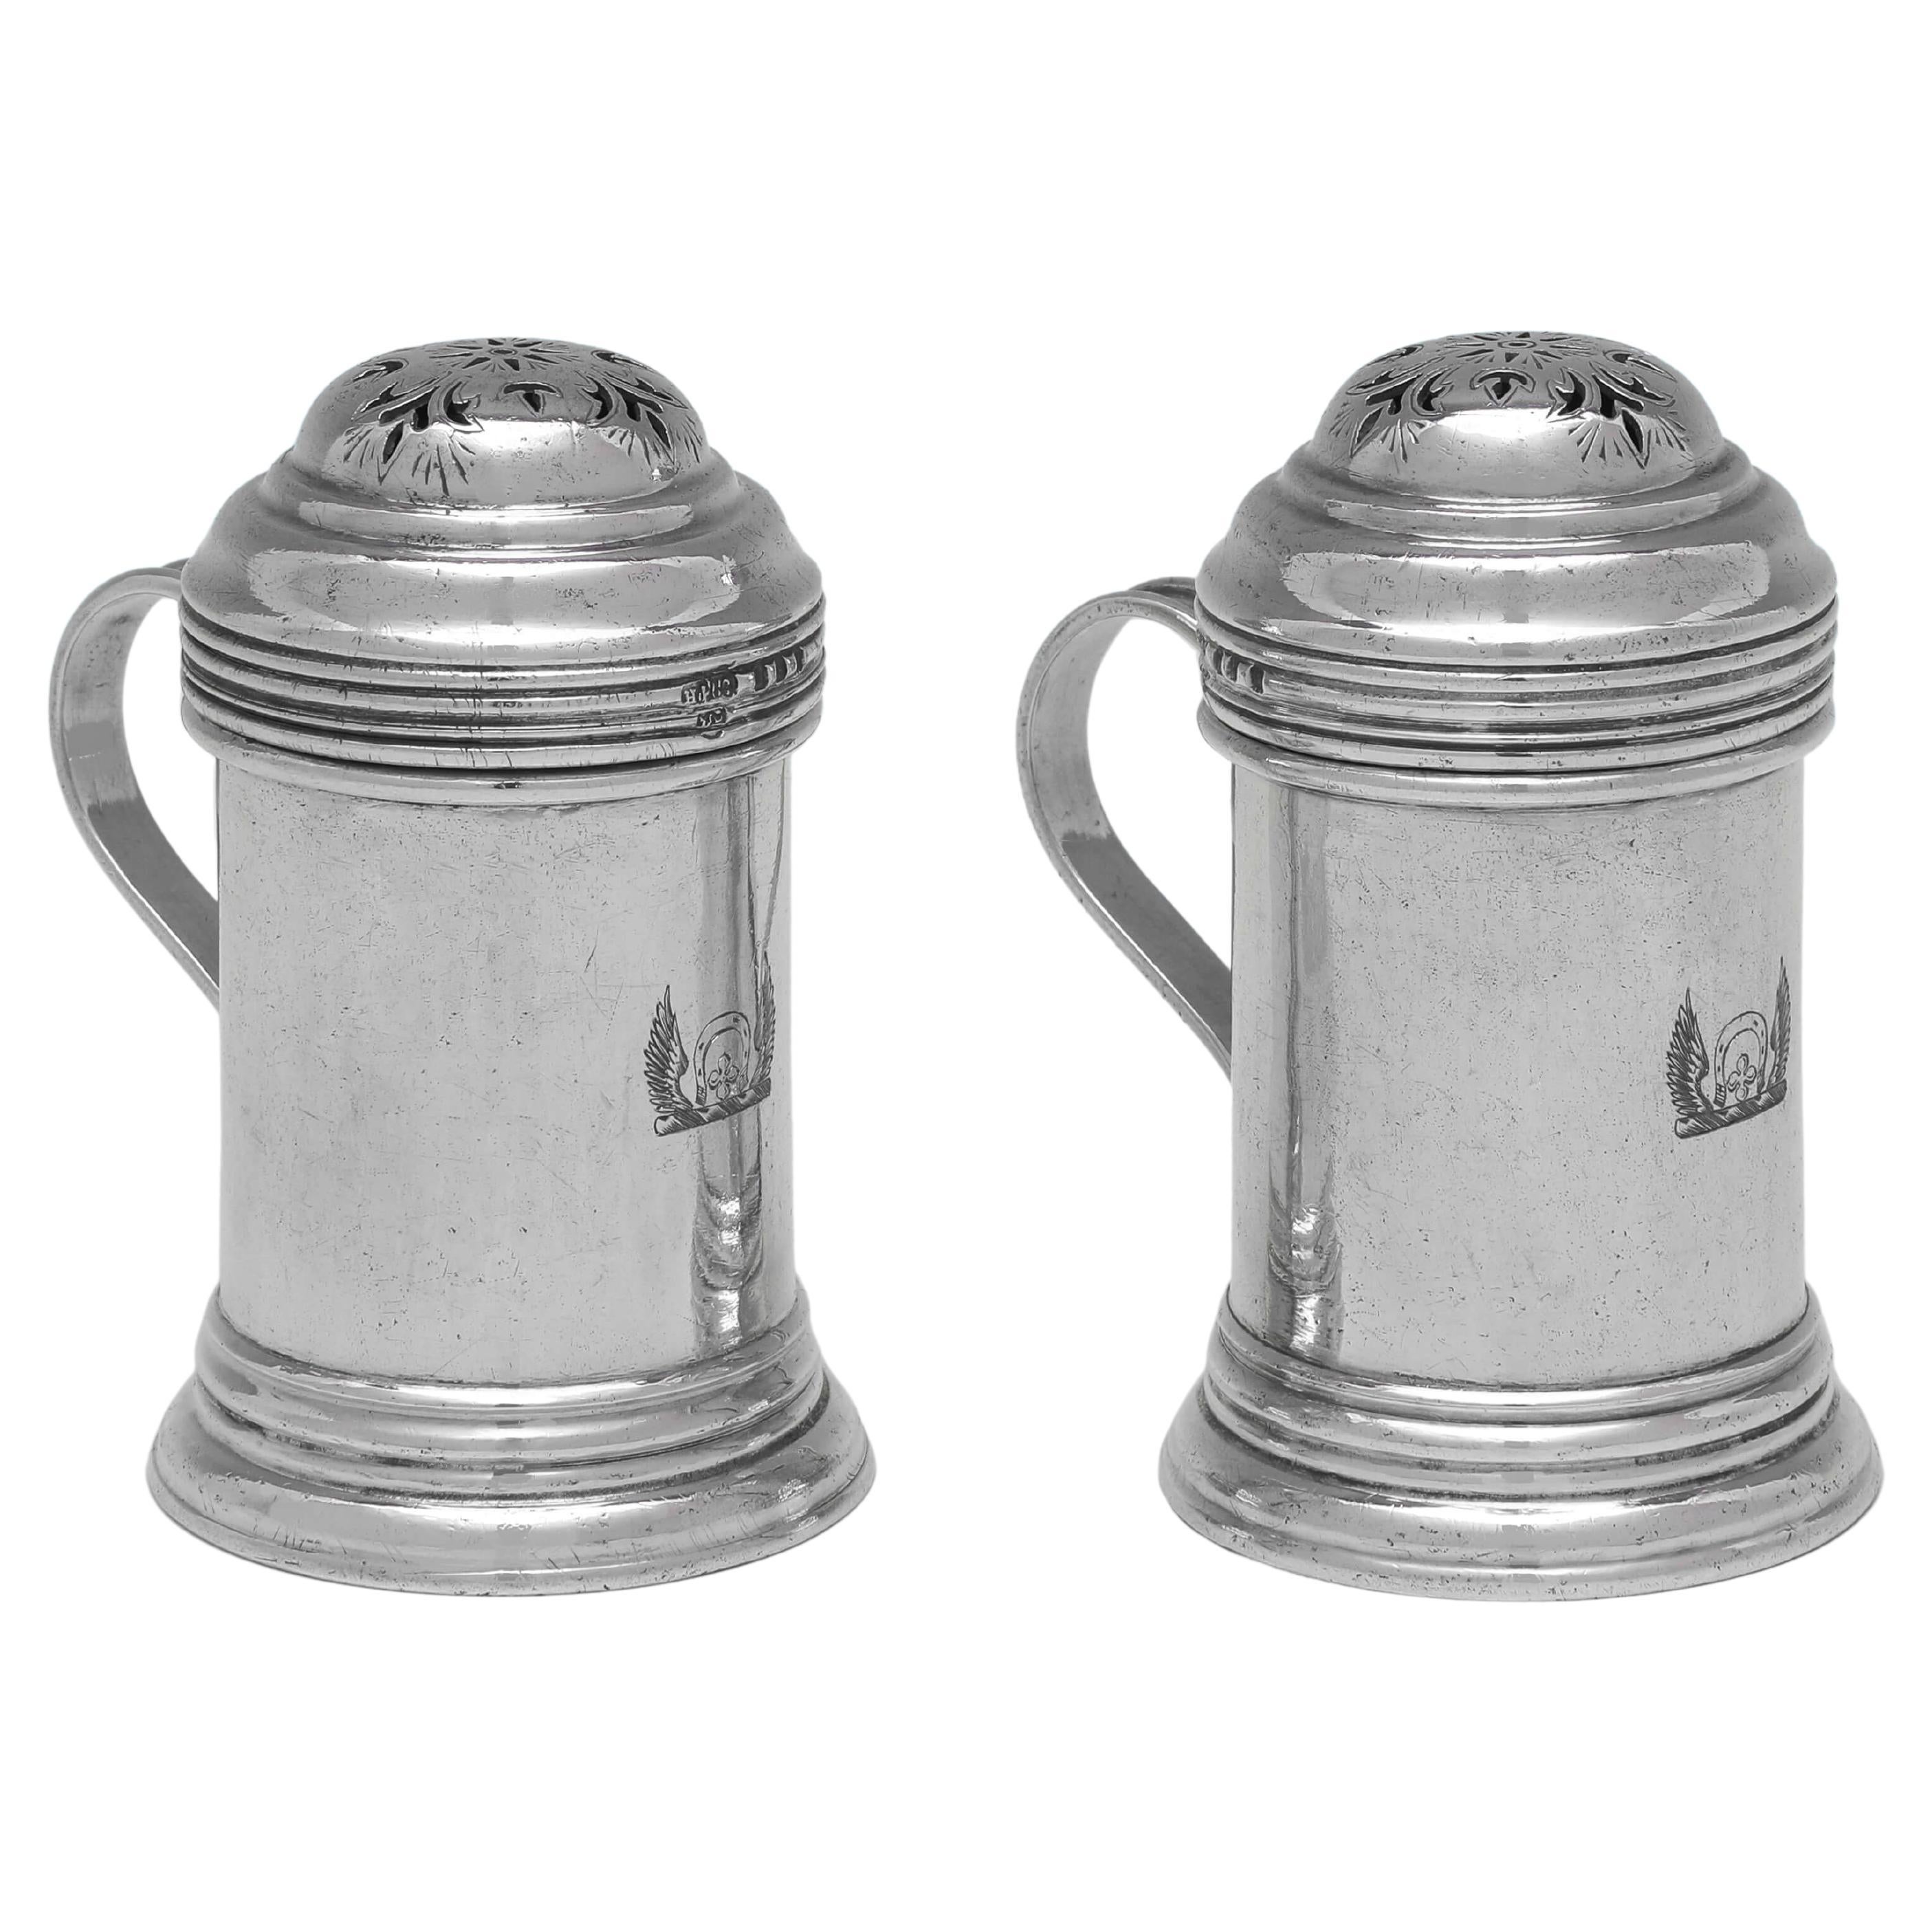 Britannia Standard Silver Pair of Kitchen Peppers, London 1930, George I Style